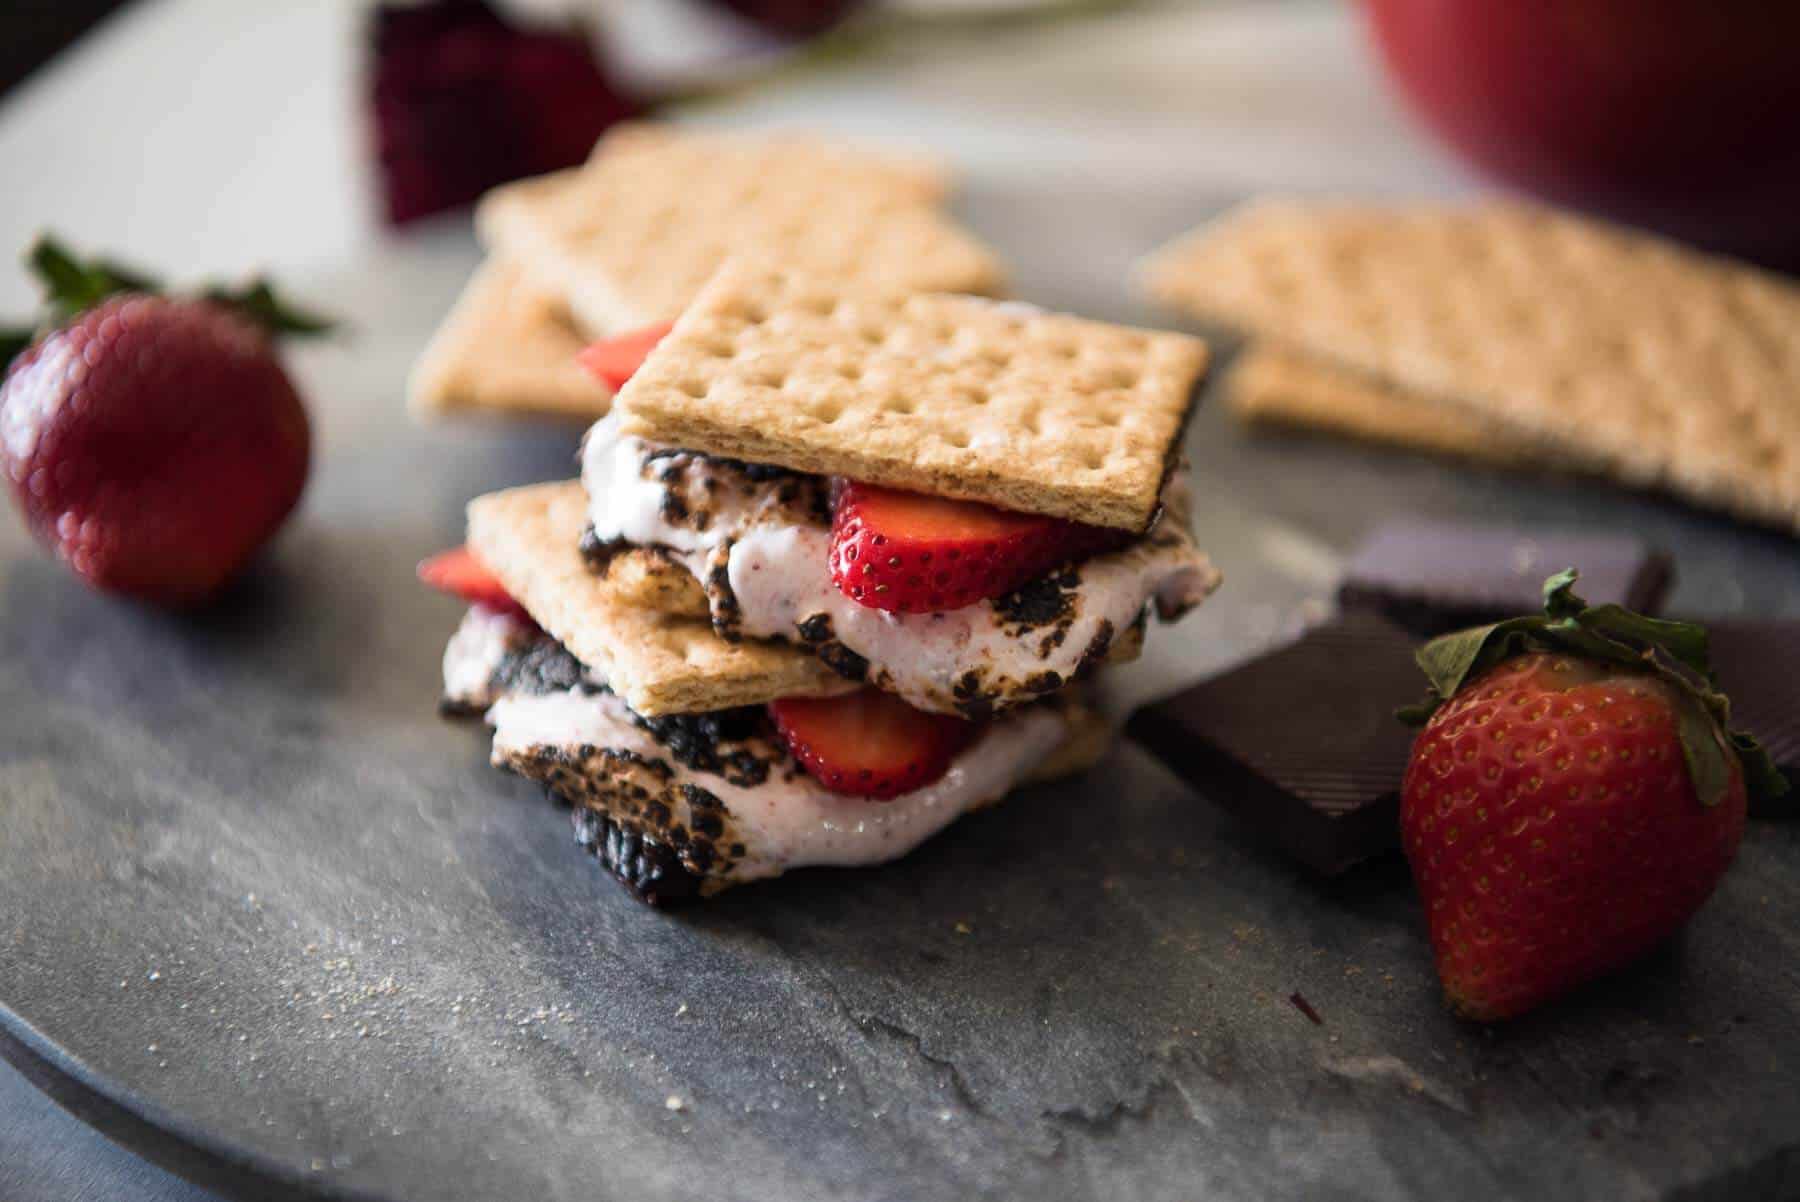 Strawberry S'mores - because winter s'mores are totally a thing! Take these classic treats up a notch by replacing the store-bought standard with homemade strawberry marshmallows, made from dehydrated Florida strawberries!